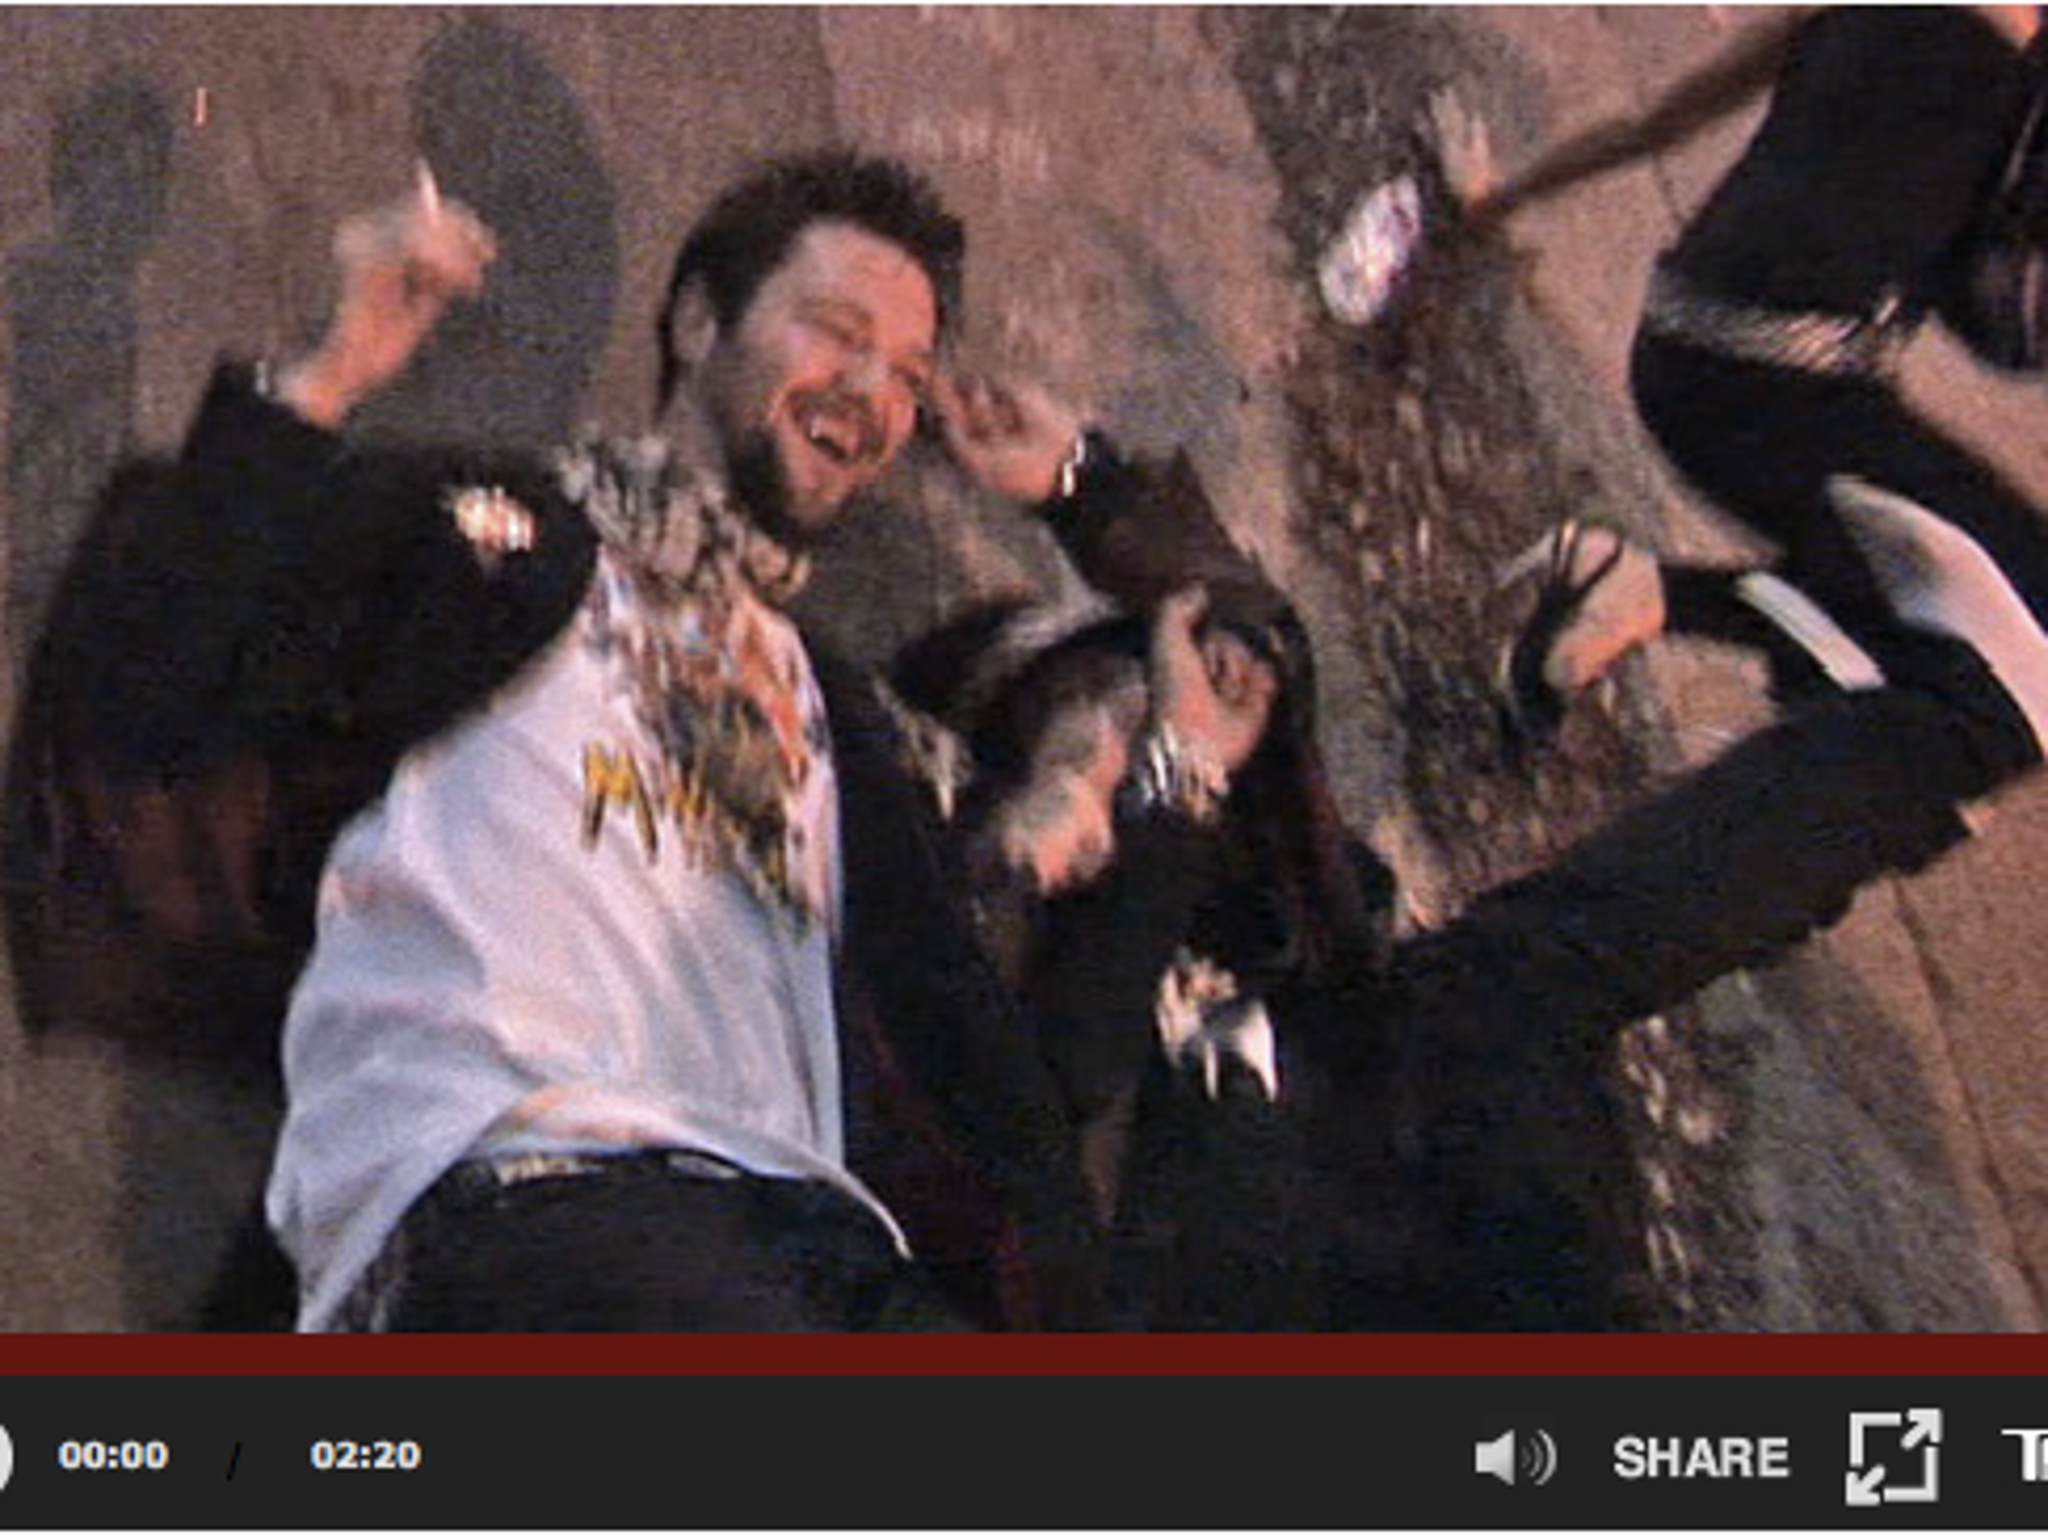 Bam Margera -- Wasted pic